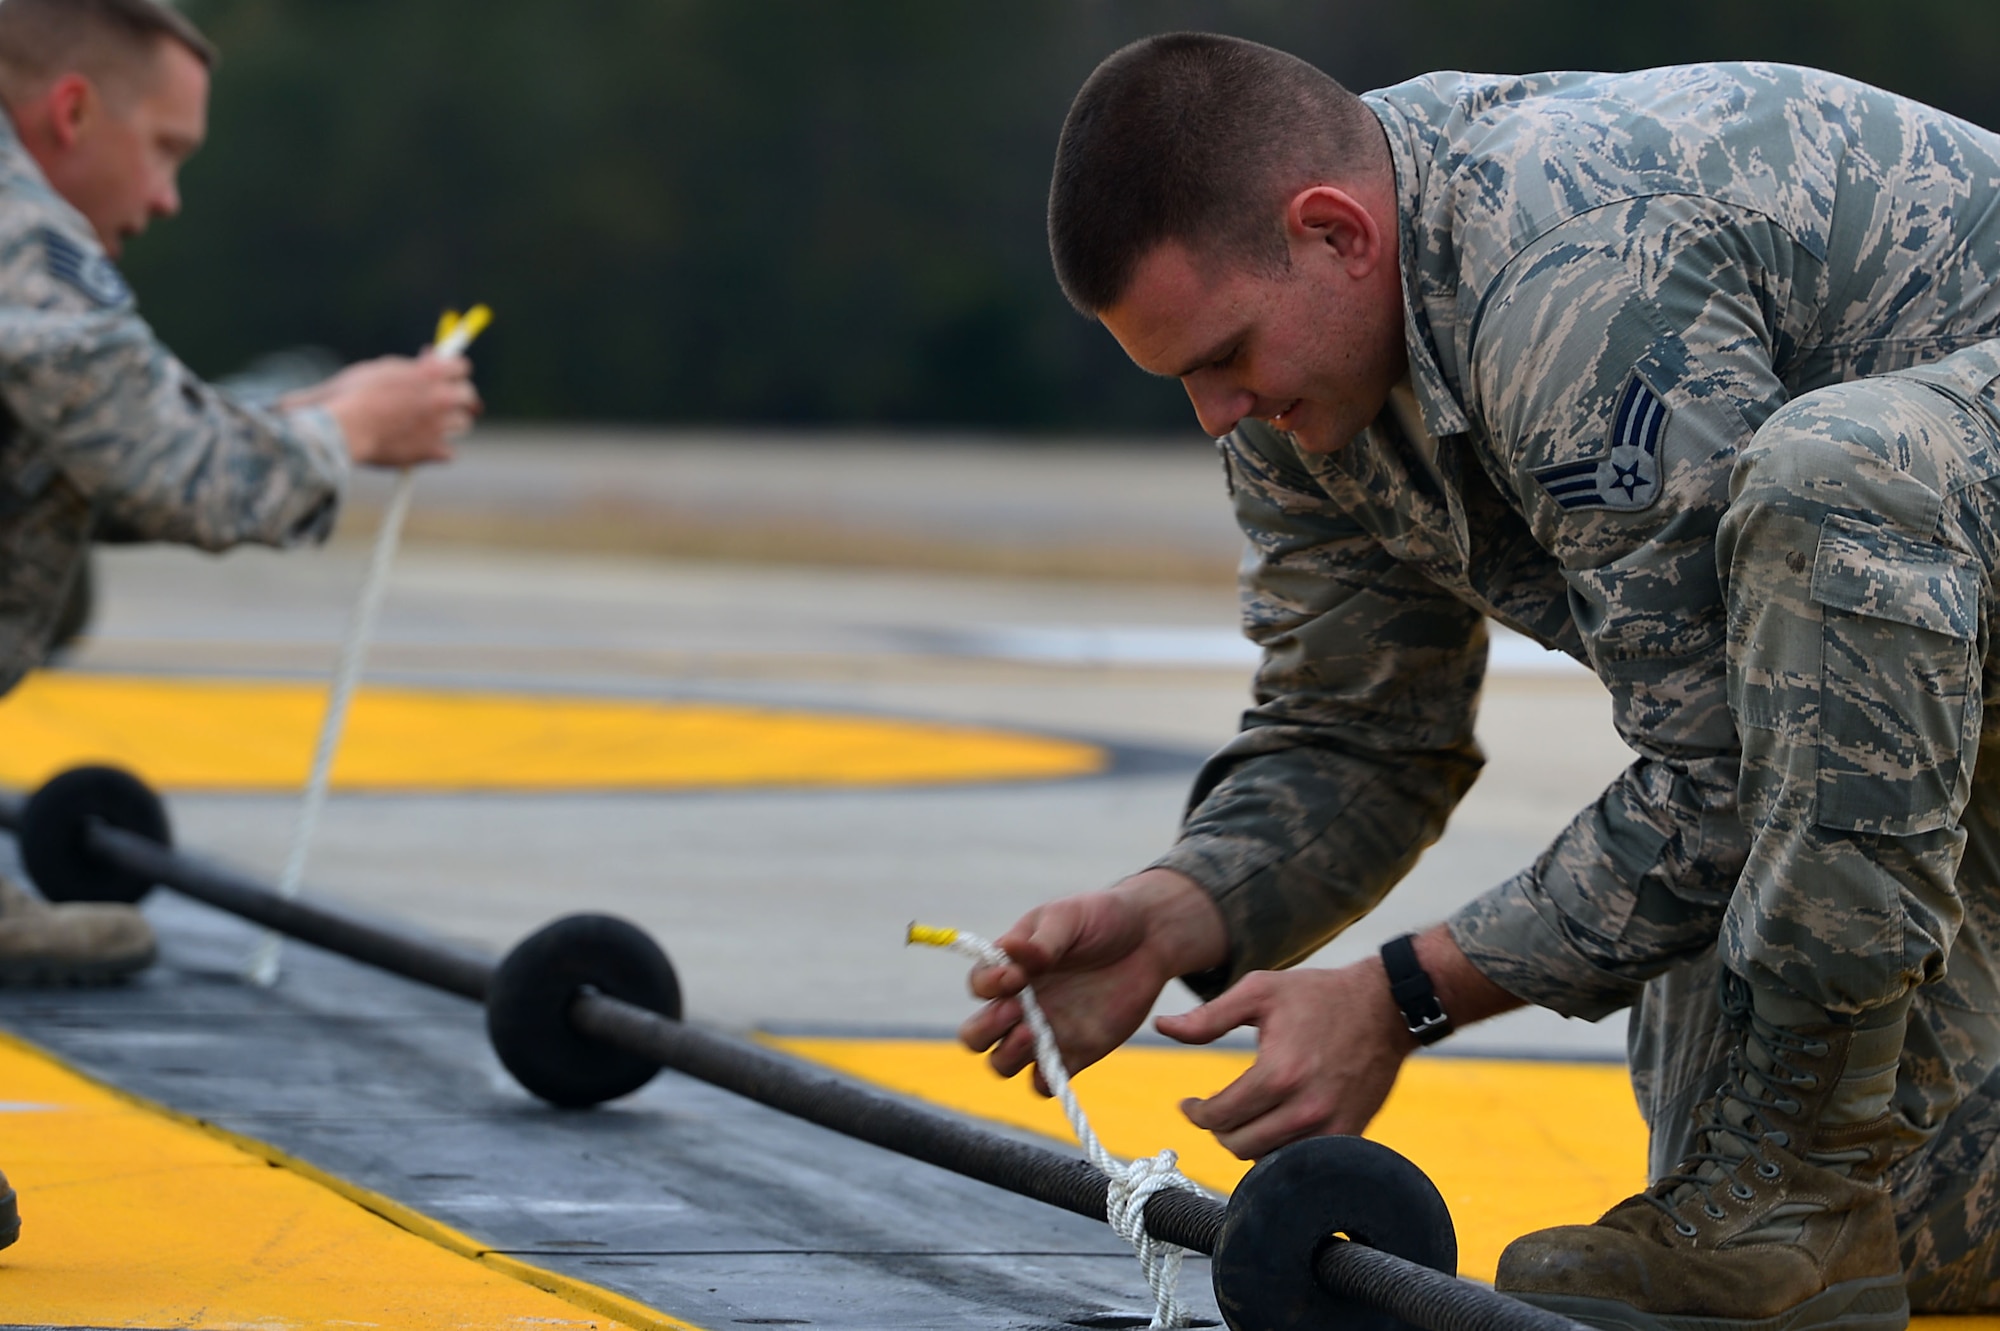 U.S. Air Force Senior Airman Jacob Smith, 20th Civil Engineer Squadron power production technician, prepares rubber donuts for a Barrier Artillery Kit-12 rotary friction brake aircraft arresting system cable at Shaw Air Force Base, S.C., Dec. 3, 2016. The rubber donuts elevate the cable to the proper height, providing proper distance for an aircraft to latch onto the cable in the event of an emergency landing. (U.S. Air Force photo by Airman 1st Class Christopher Maldonado) 